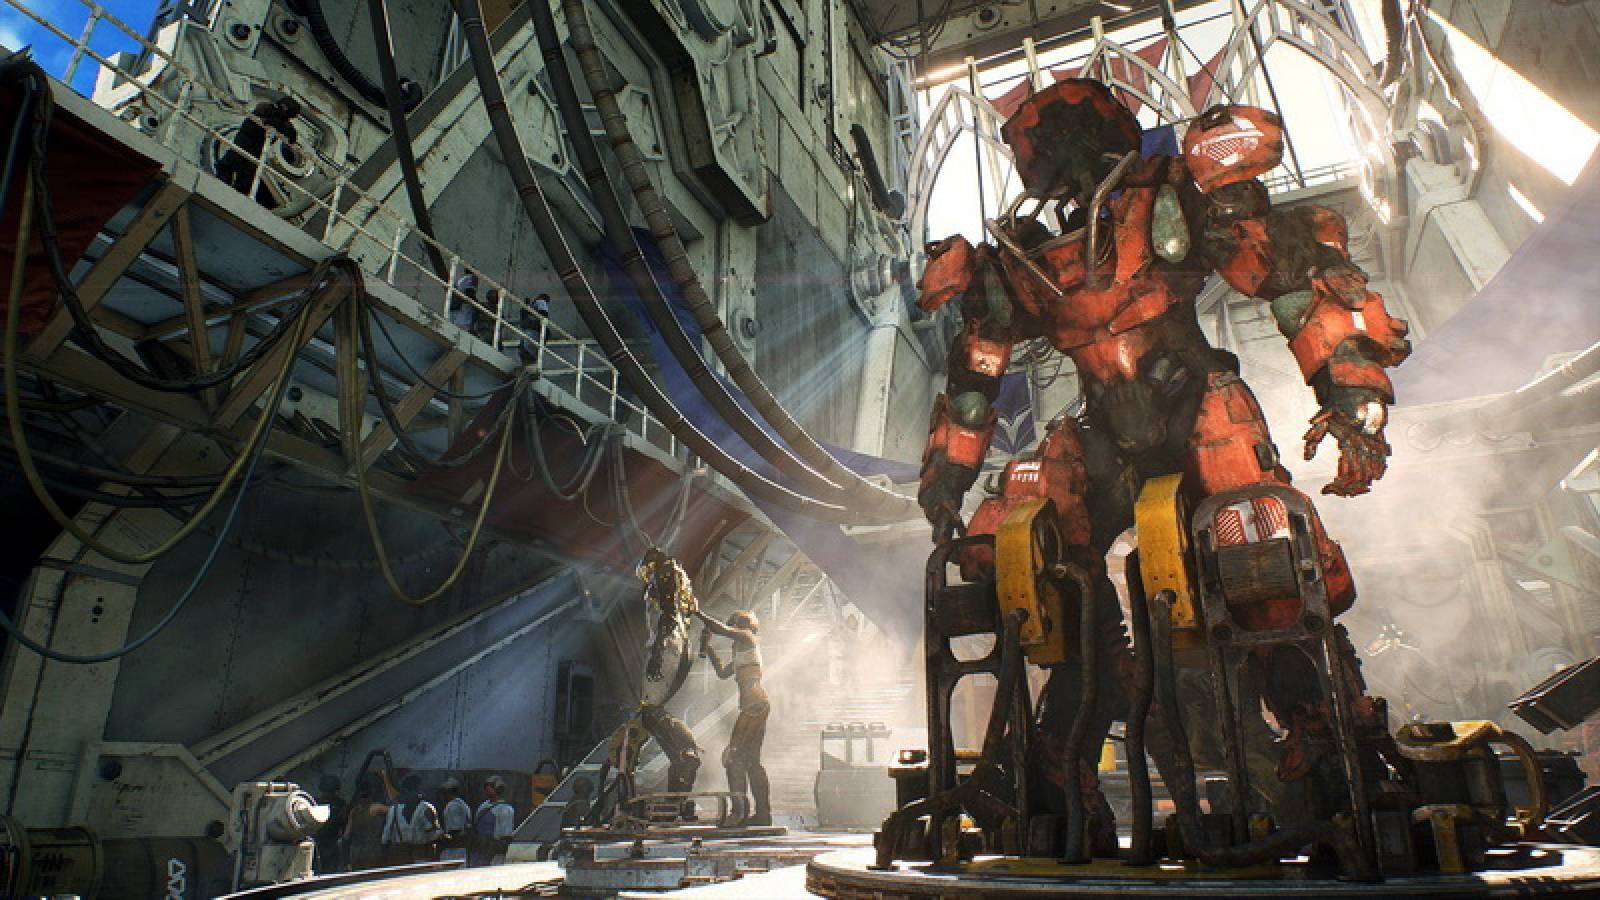 How did Anthem descend from a peak into a deep abyss? - Last